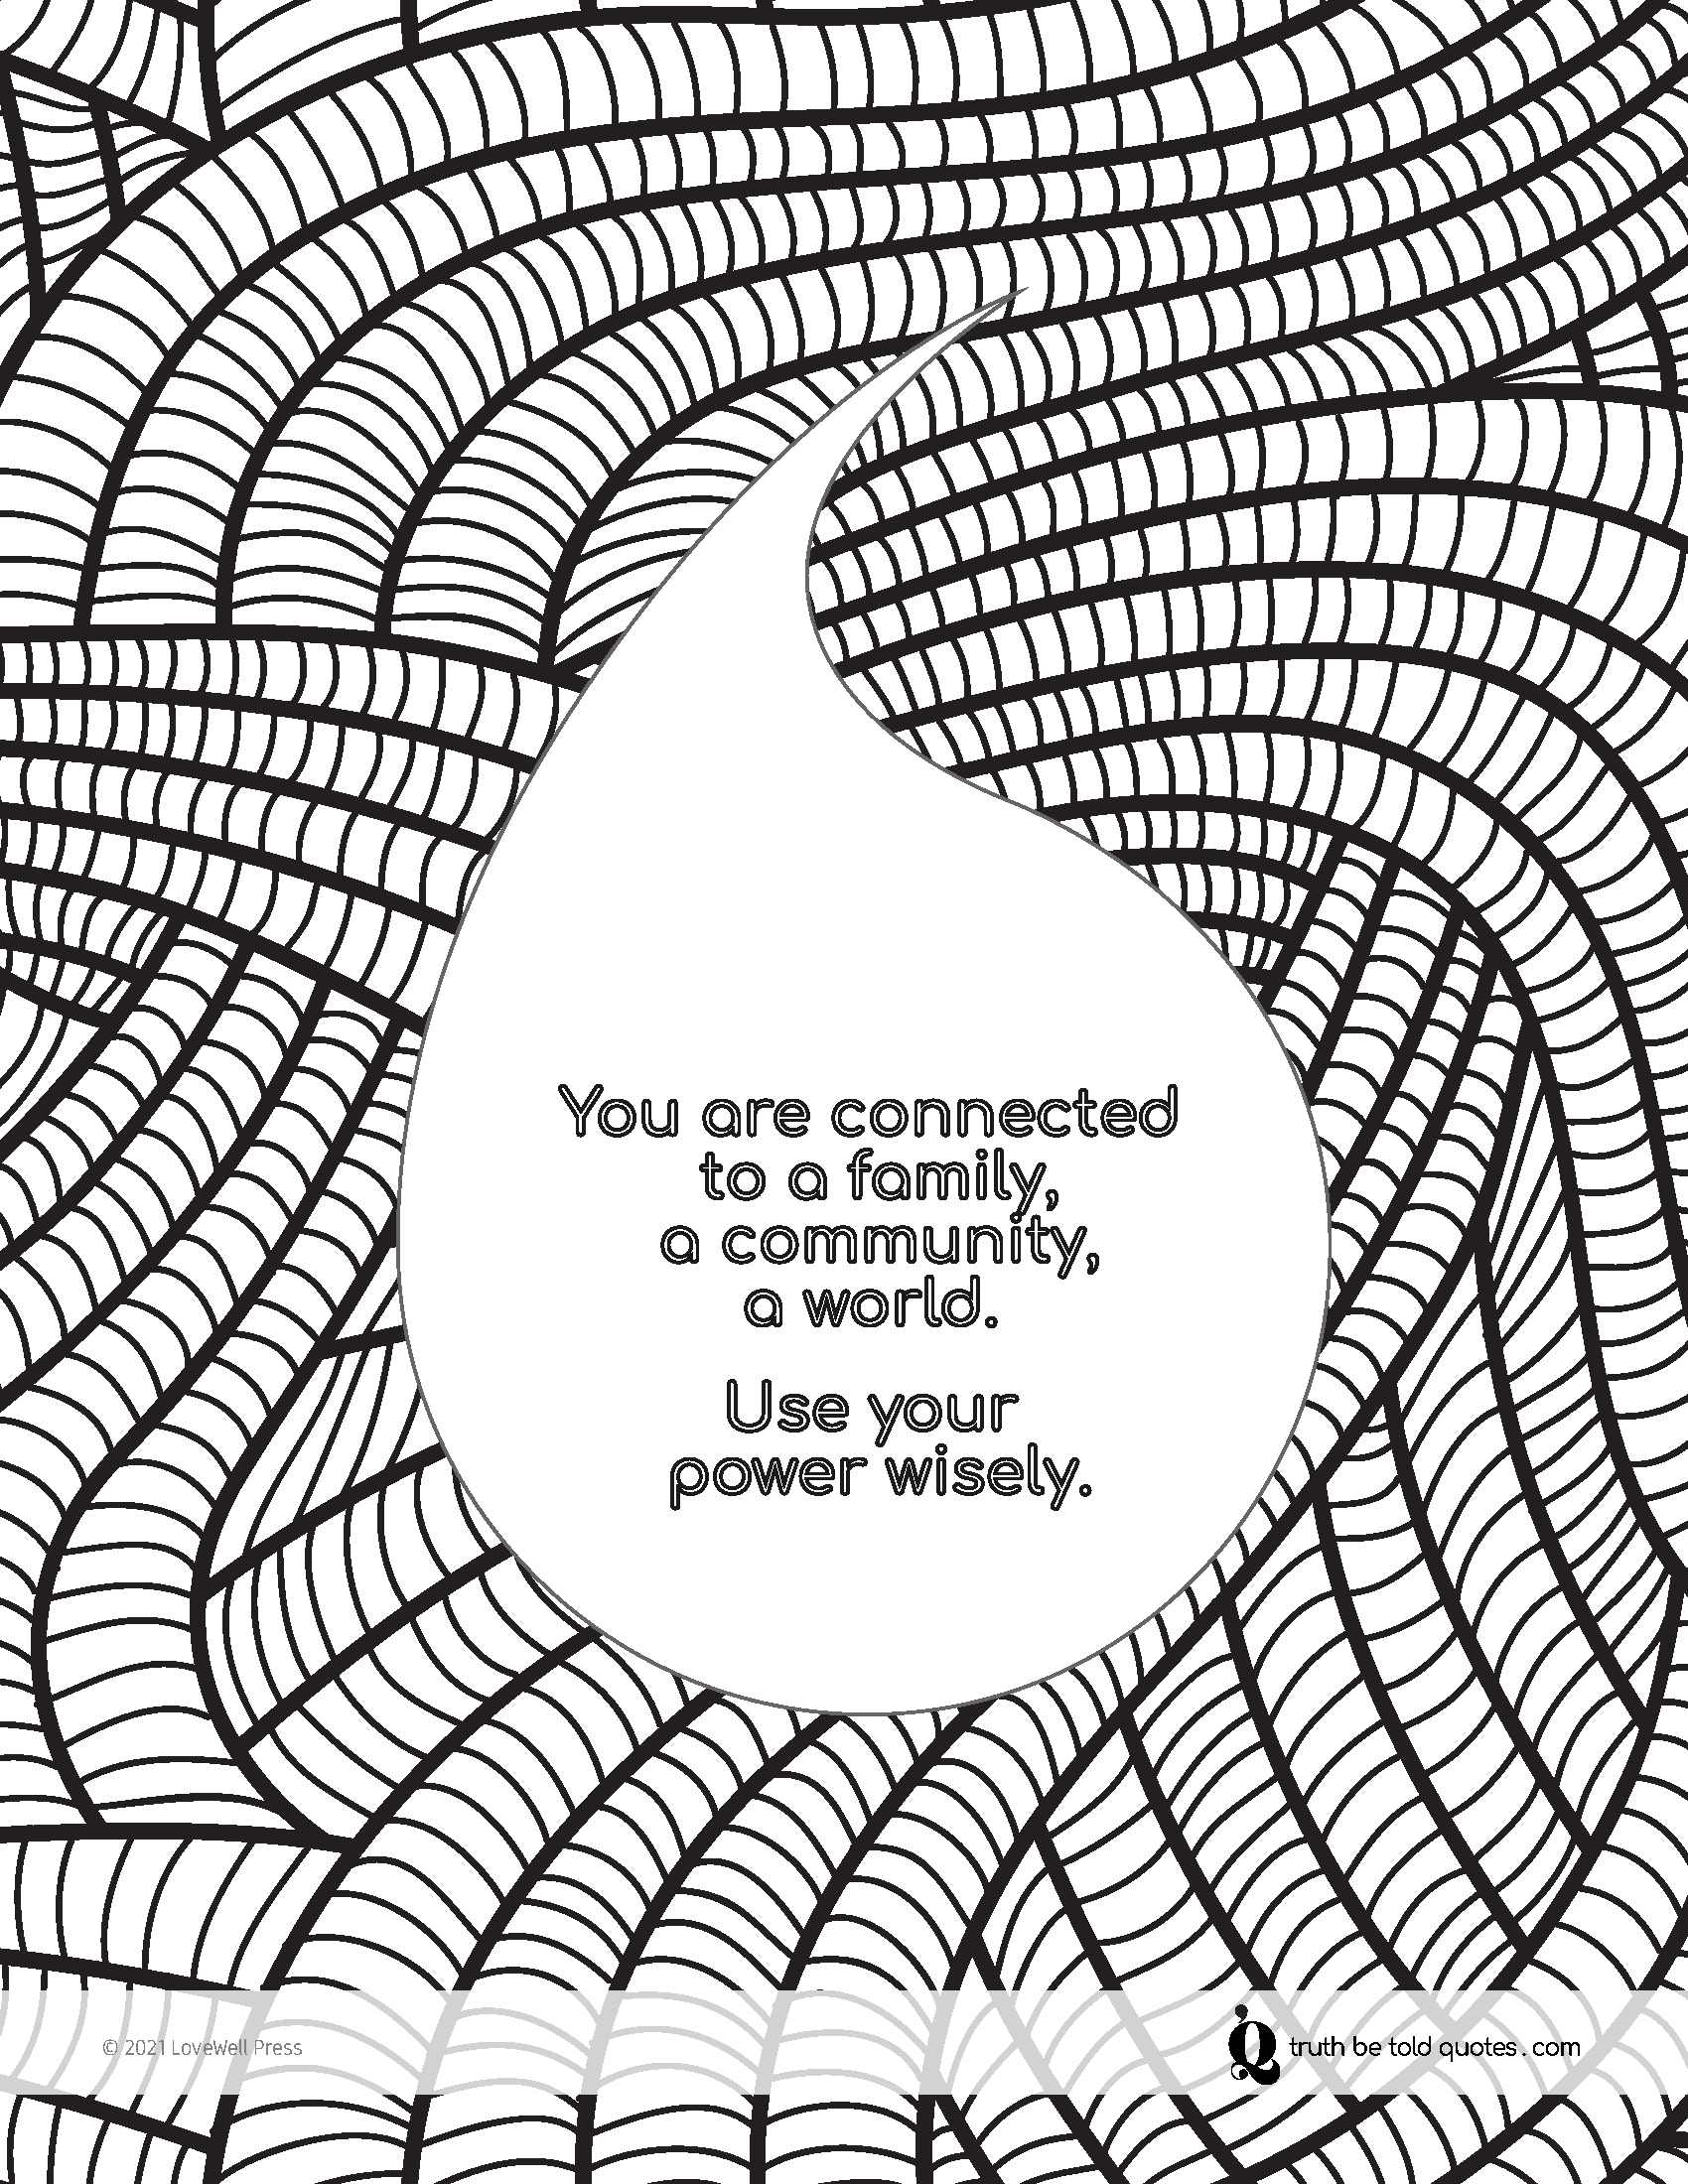 Free mindfulness coloring page with quote about responsibility to family, community with image of intertwined ropes